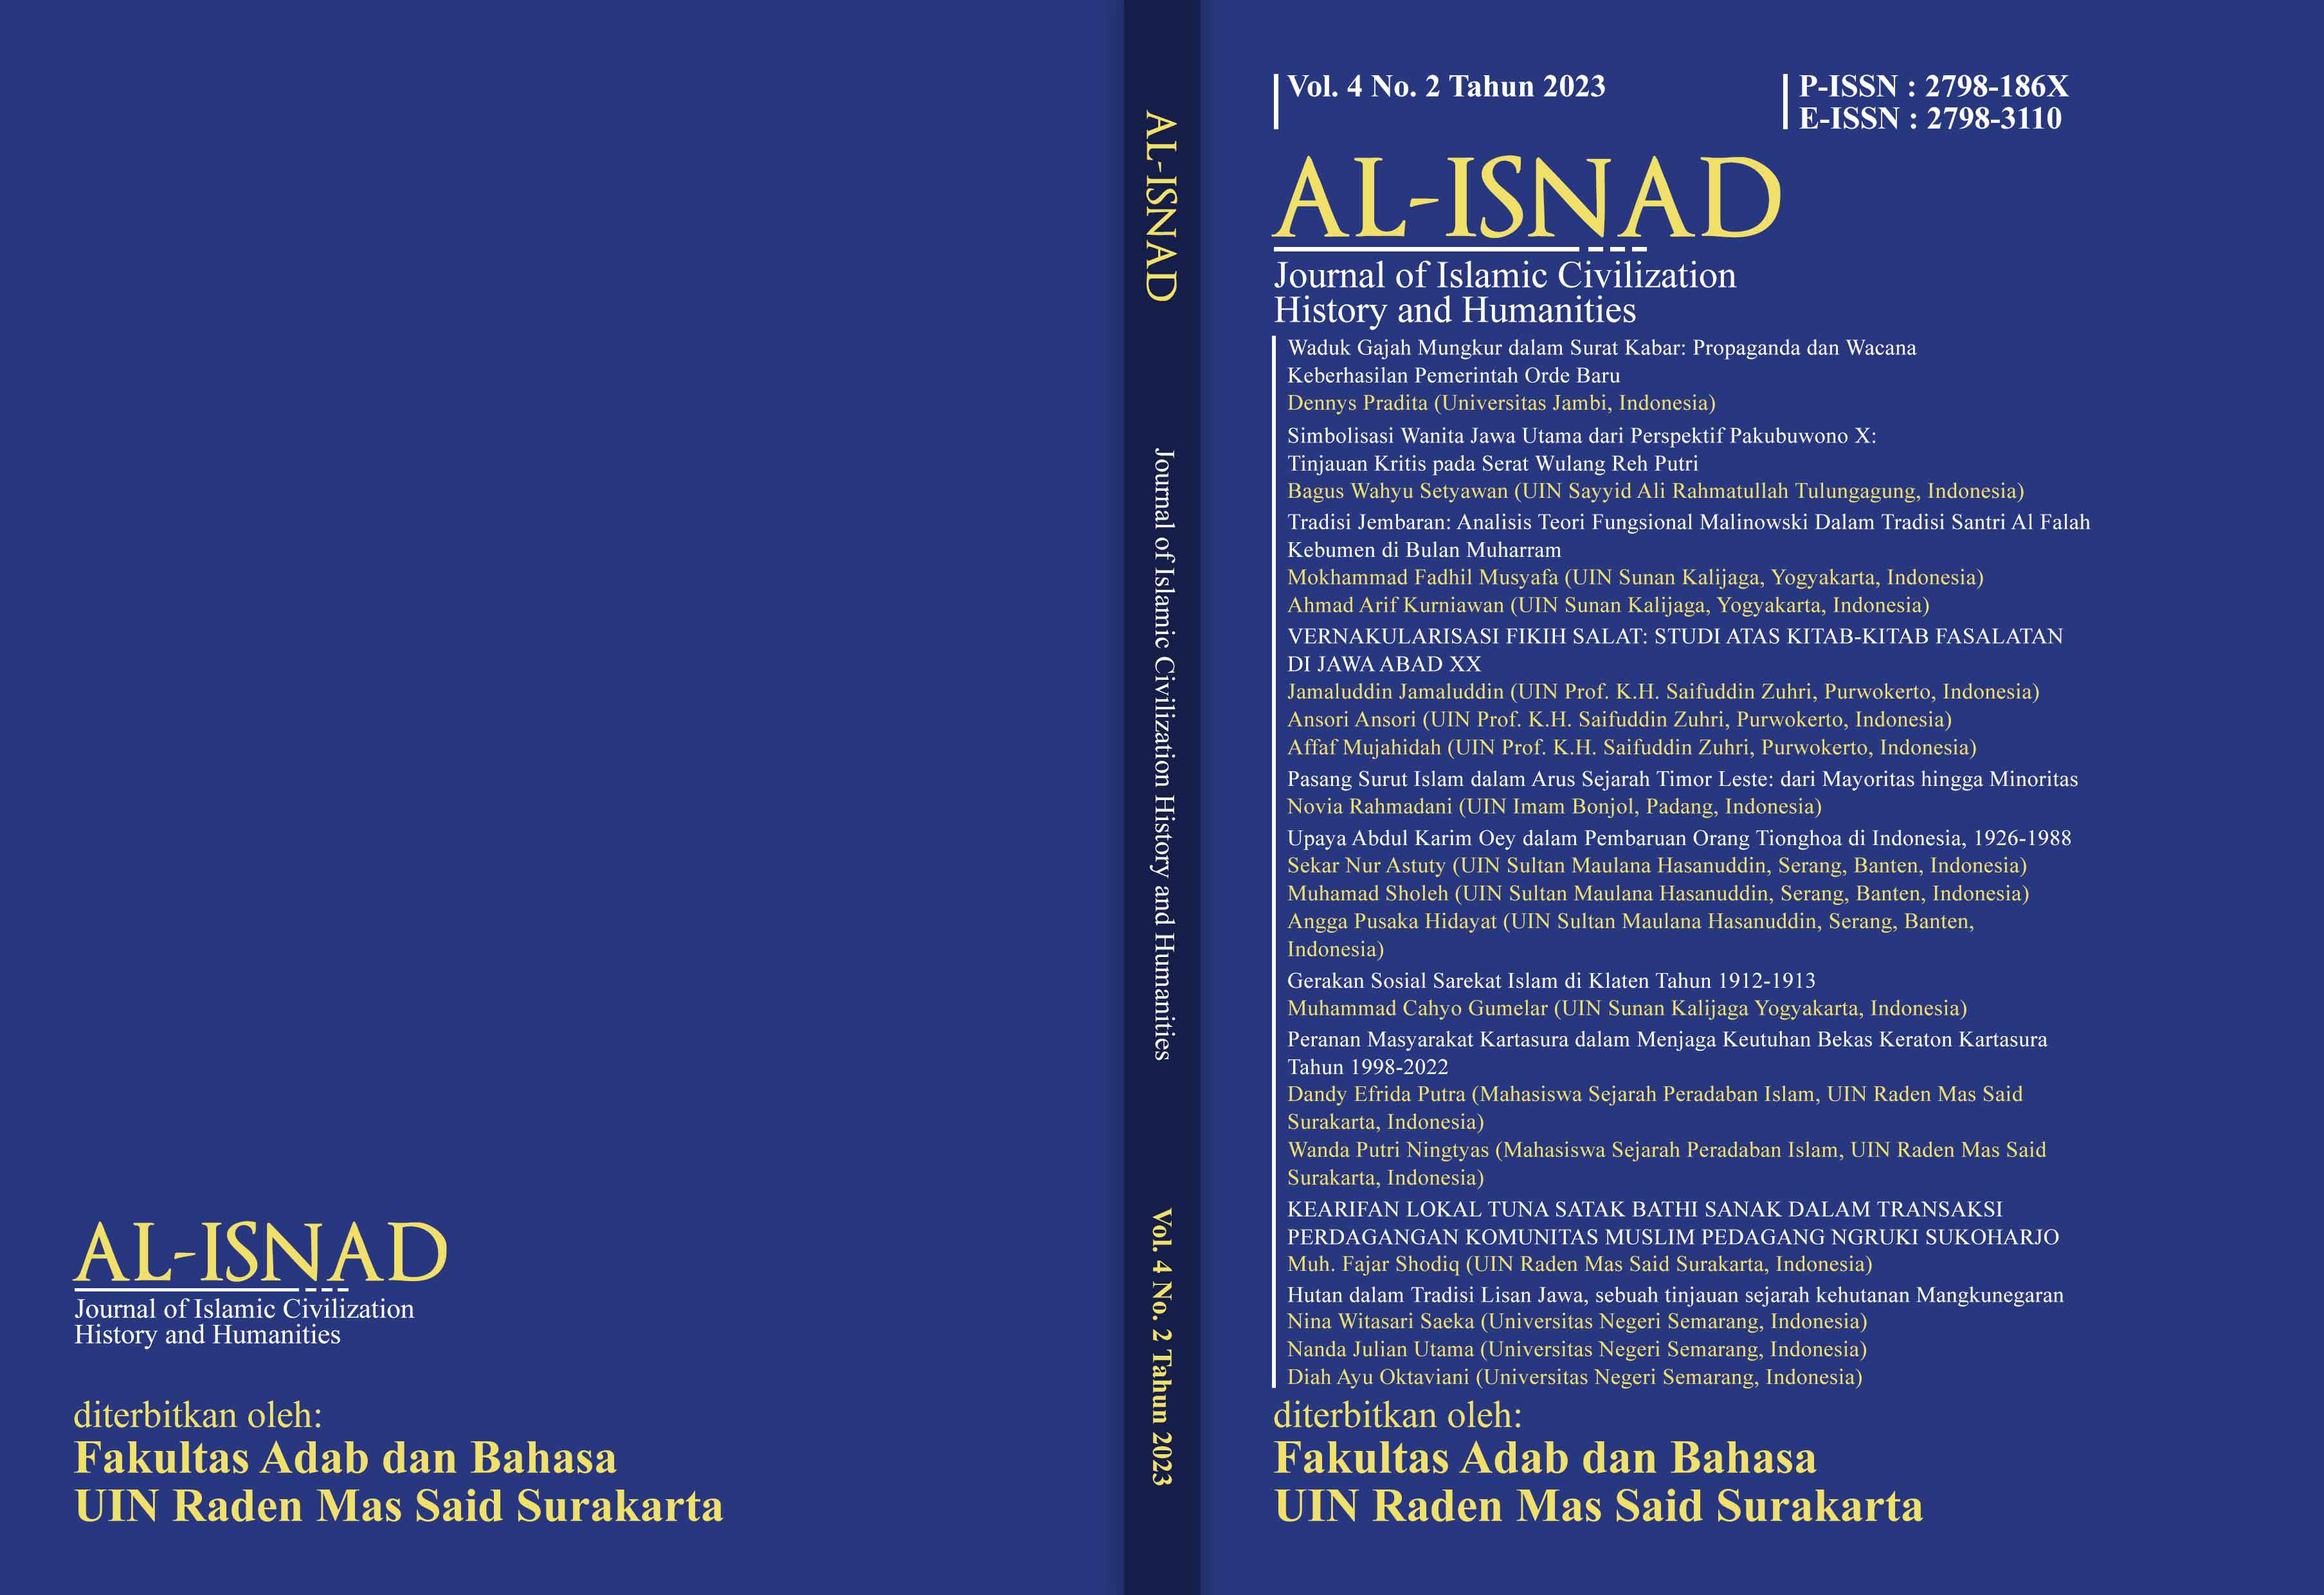 					View Vol. 4 No. 02 (2023): Al-Isnad: Journal of Islamic Civilization History and Humanities
				